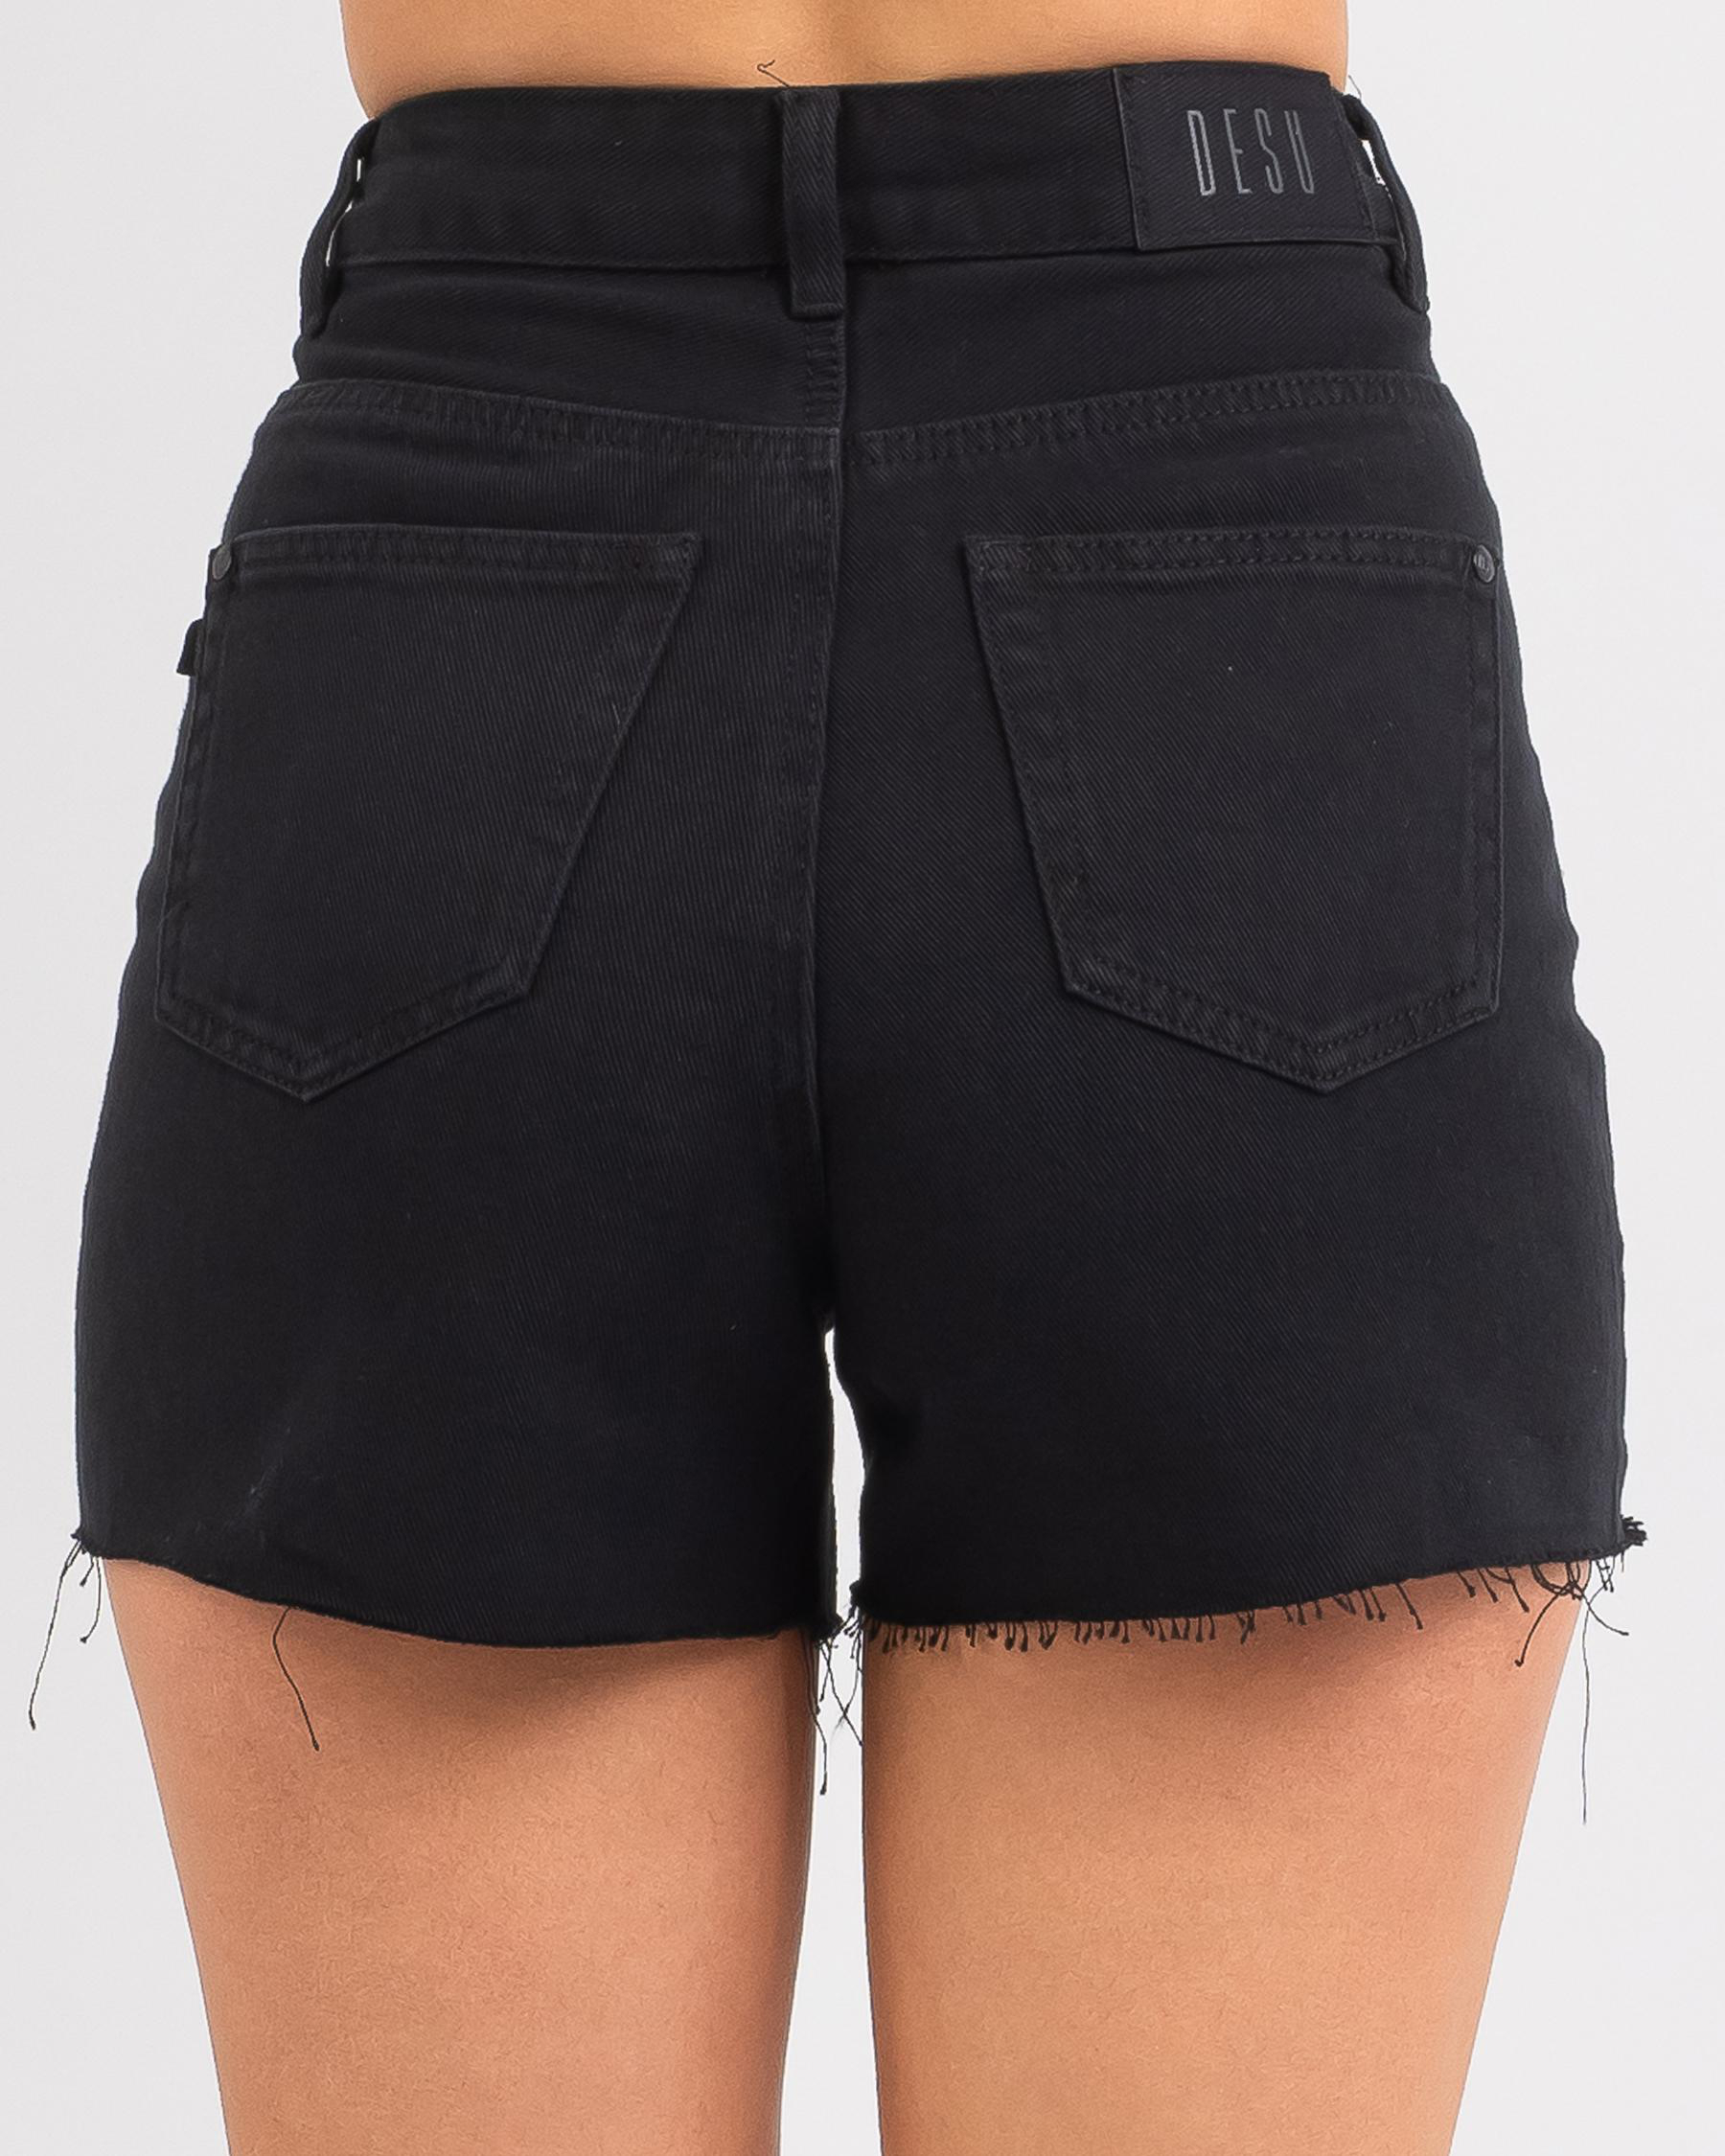 Shop DESU Rocco Shorts In Washed Black - Fast Shipping & Easy Returns ...